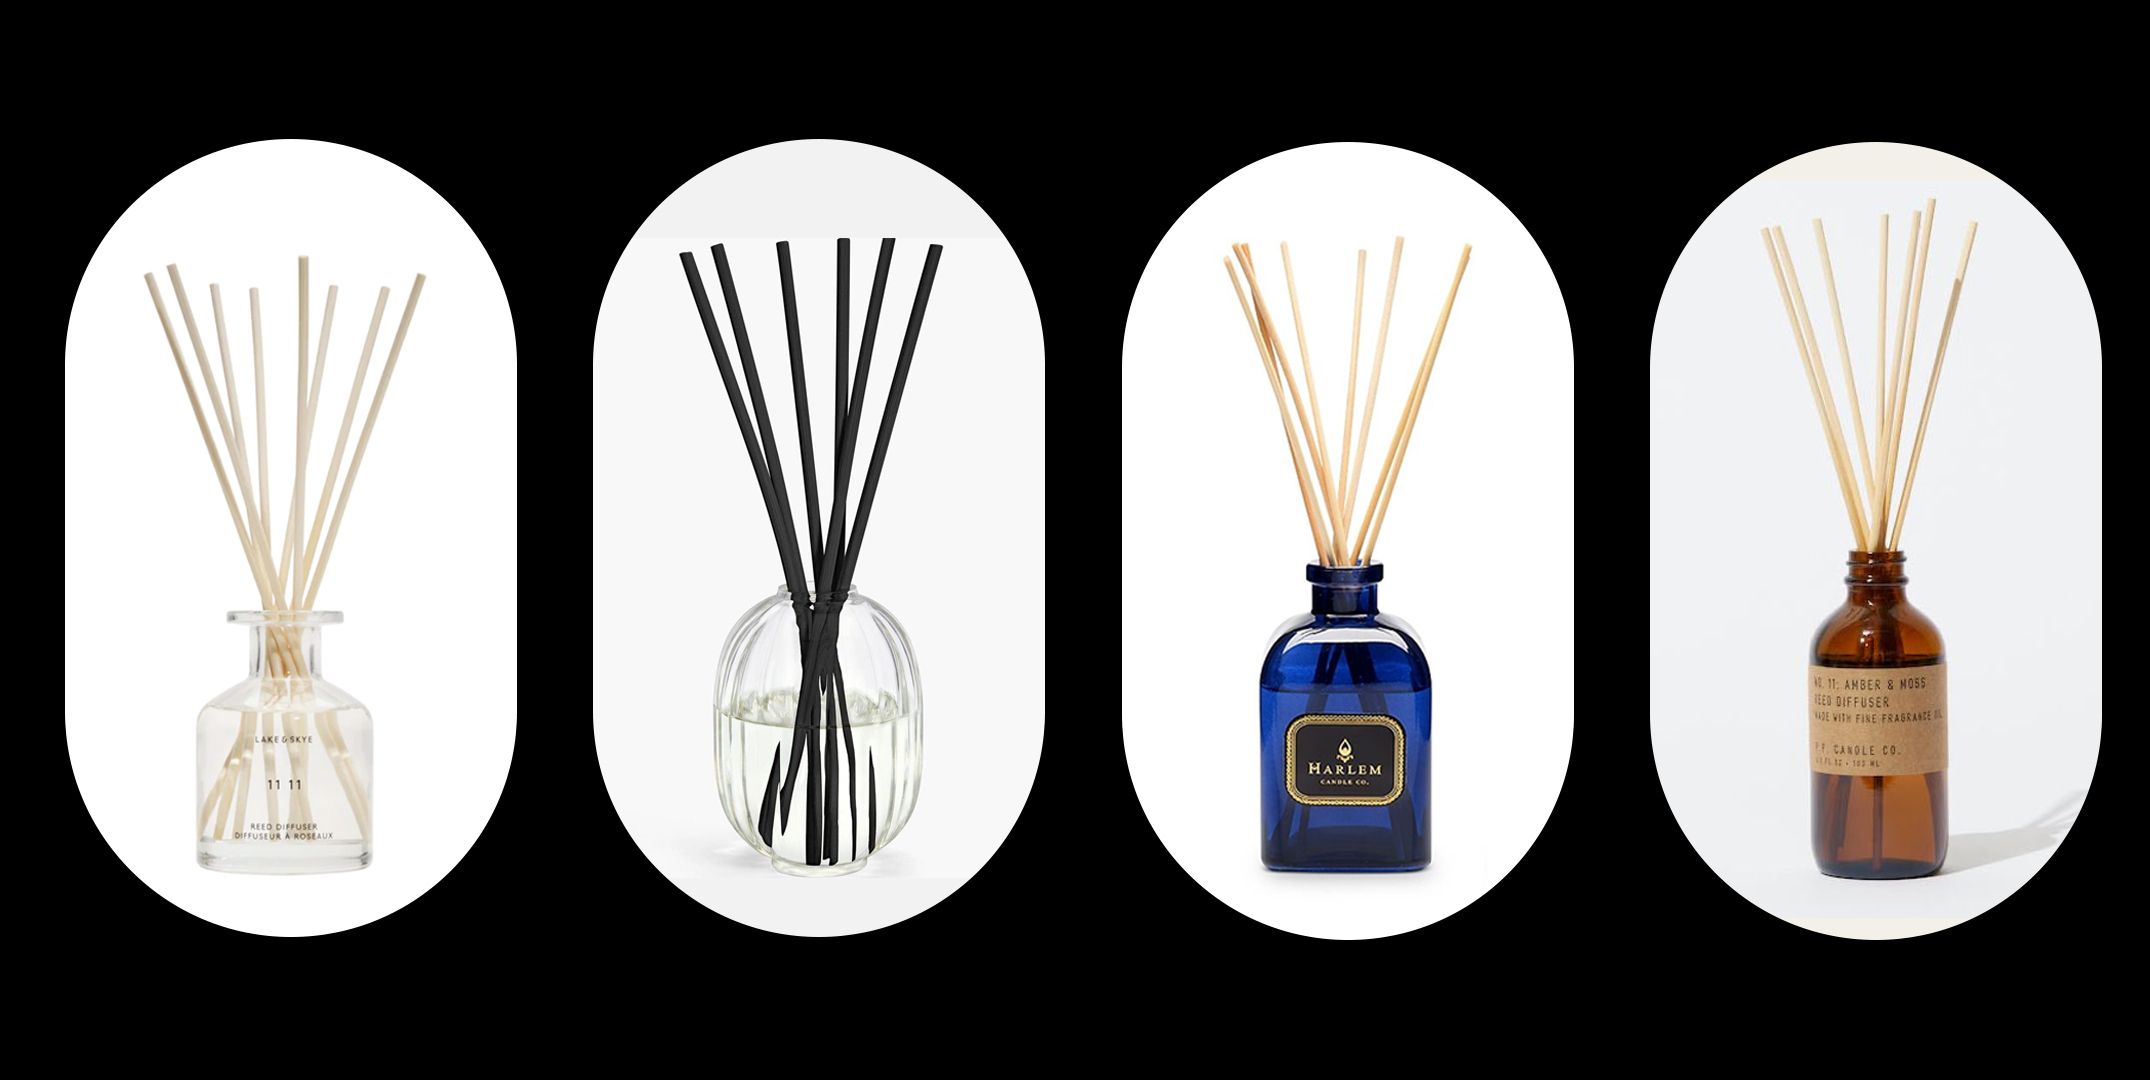 Reed Diffuser Oil Set 4 Oz Oil Refill & 10 12 Natural Reeds, Choice Scent  Room Deodorizer, Home Office Air Freshener 